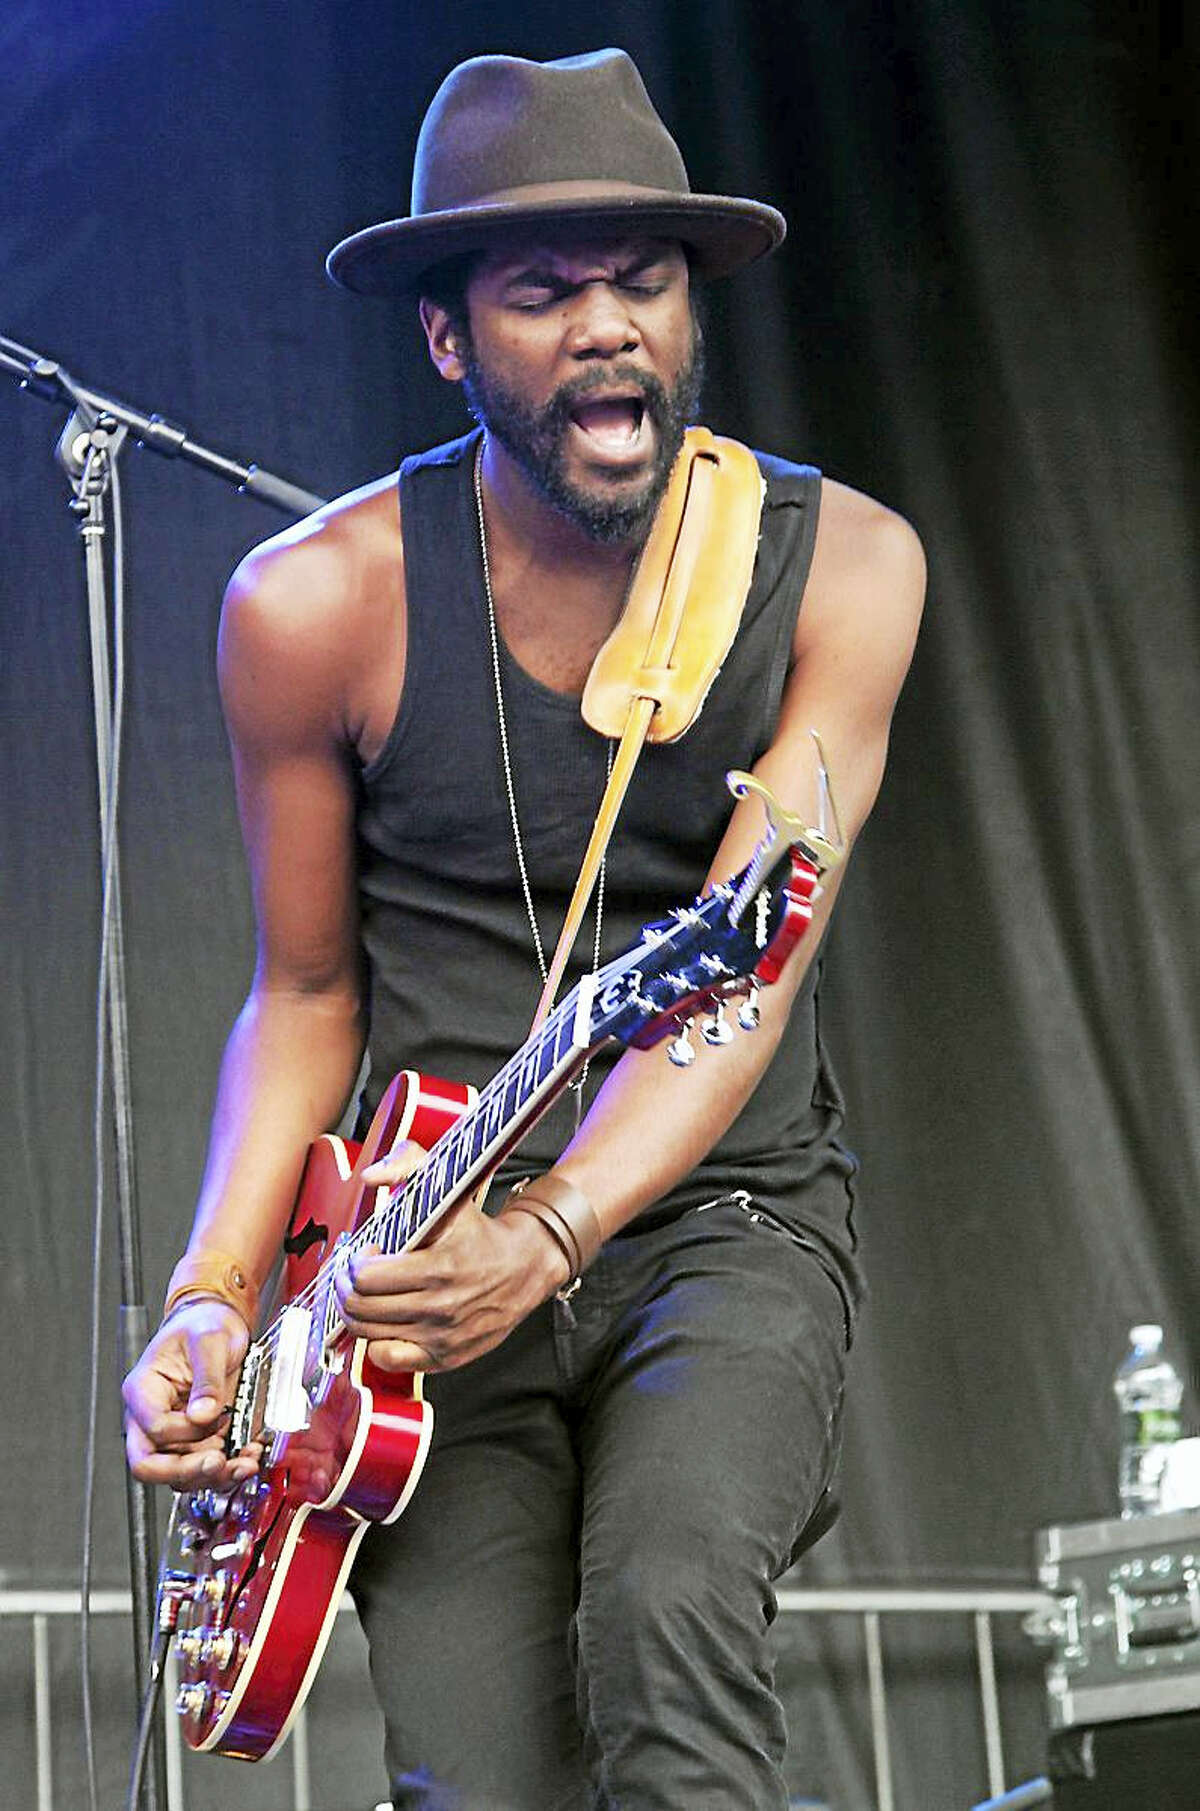 Photo by John AtashianGuitarist and actor Gary Clark Jr is shown performing on stage during a concert appearance.